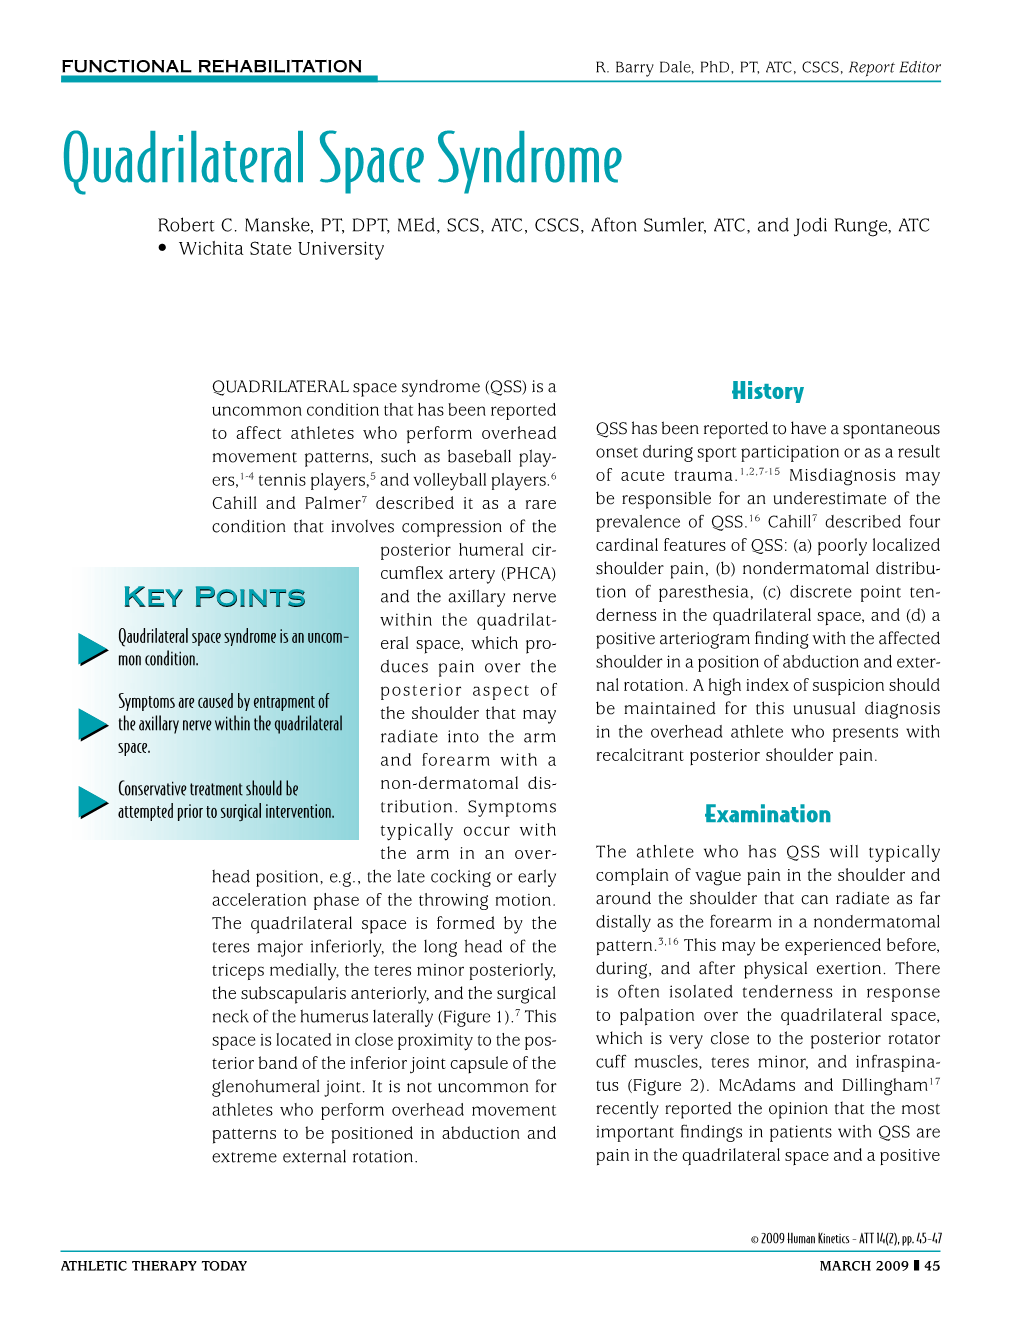 Quadrilateral Space Syndrome